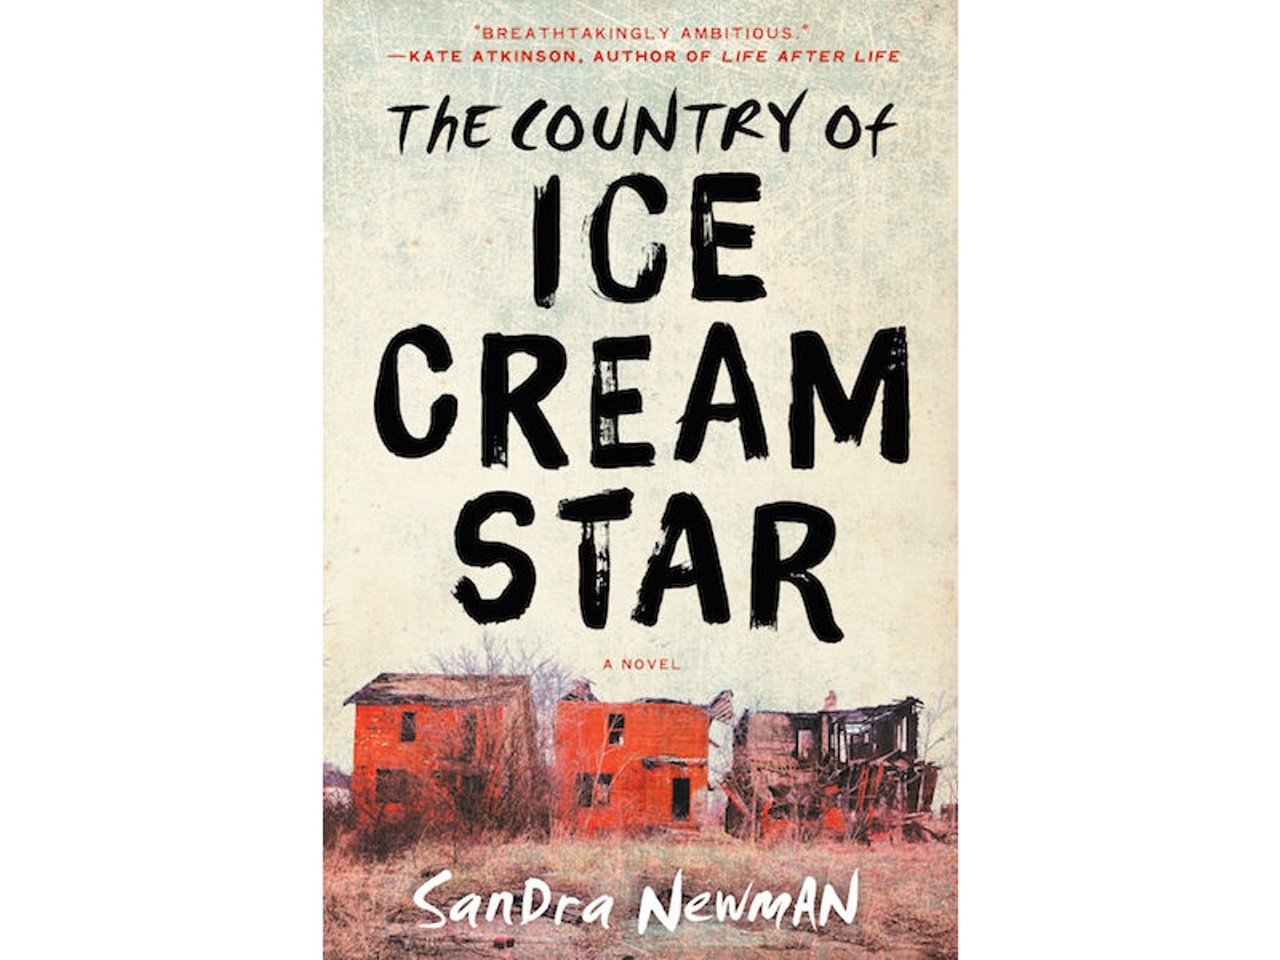 The Country of Ice Cream Star, a novel by Sandra Newman (Ecco, 592 pages)
Not since first reading my cherished Riddley Walker have I enjoyed genre fiction so much. Newman spins a story from the dystopian future (who didn't, this year?) told in an invented language (hey now) that takes time to grasp, but is worth the early slow going. Ice Cream is one of my favorite characters of the past decade; she still lives in my head. &#151;JBY